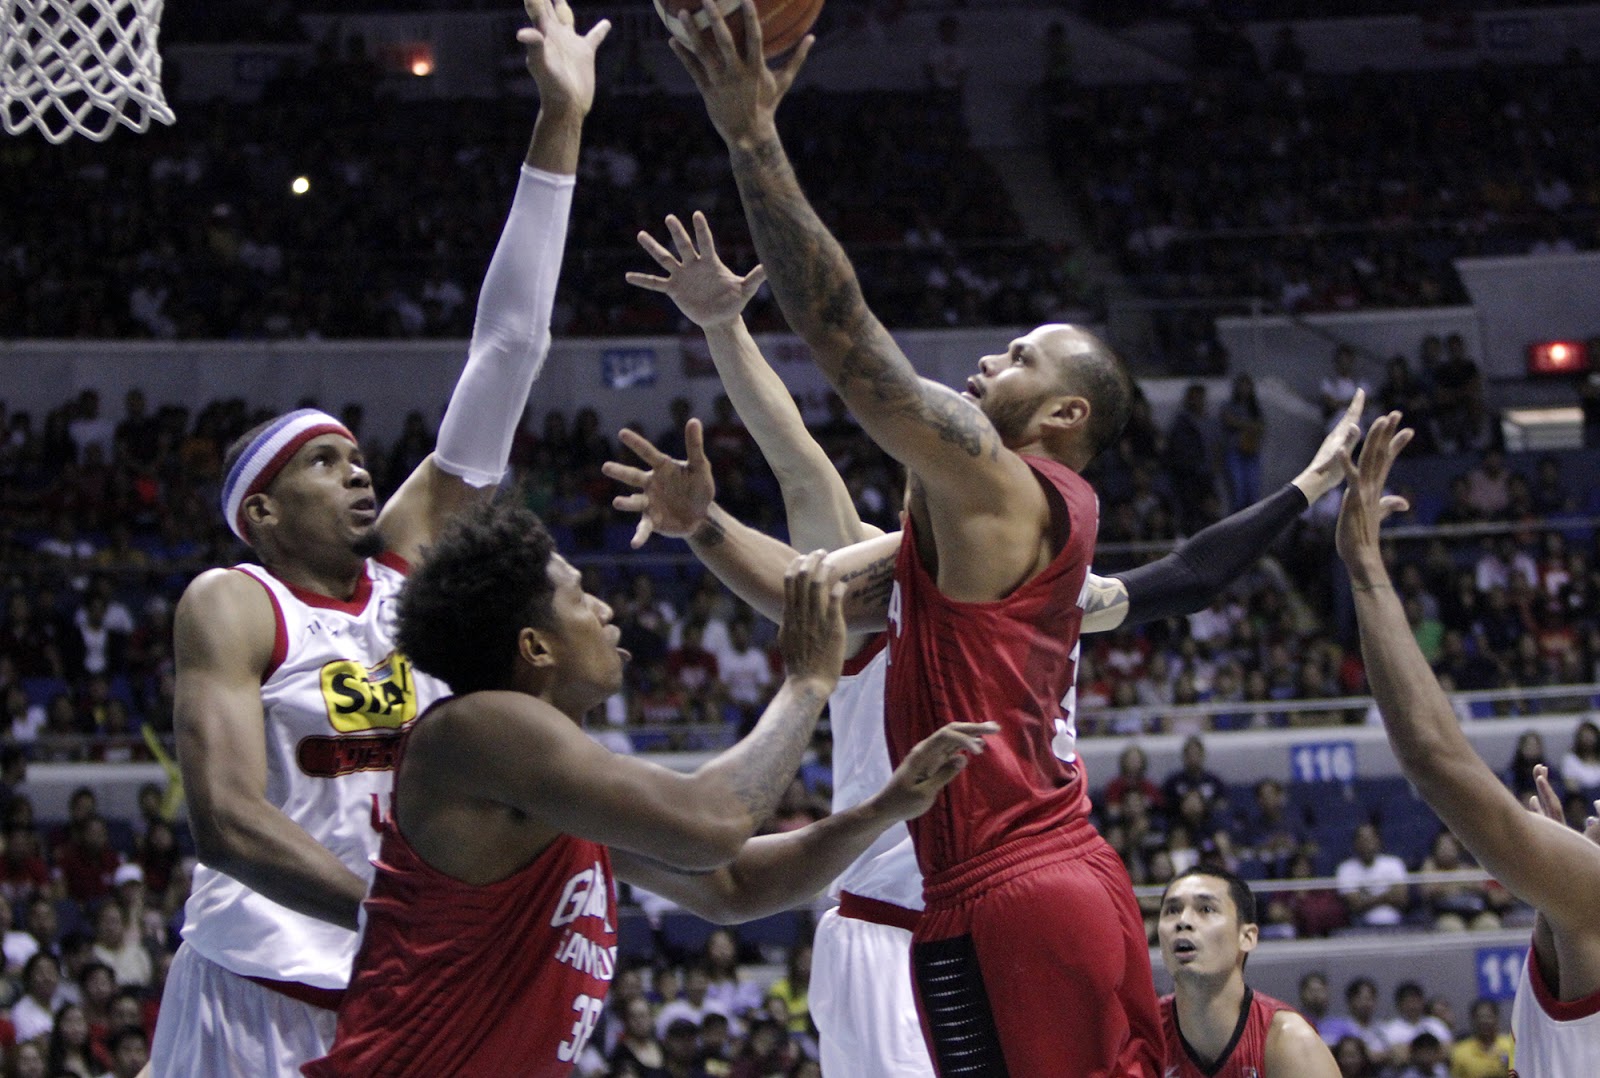 Sol Mercado explodes with 21pts in game 6, Ginebra sends Manila Classico series to a deciding game 7 